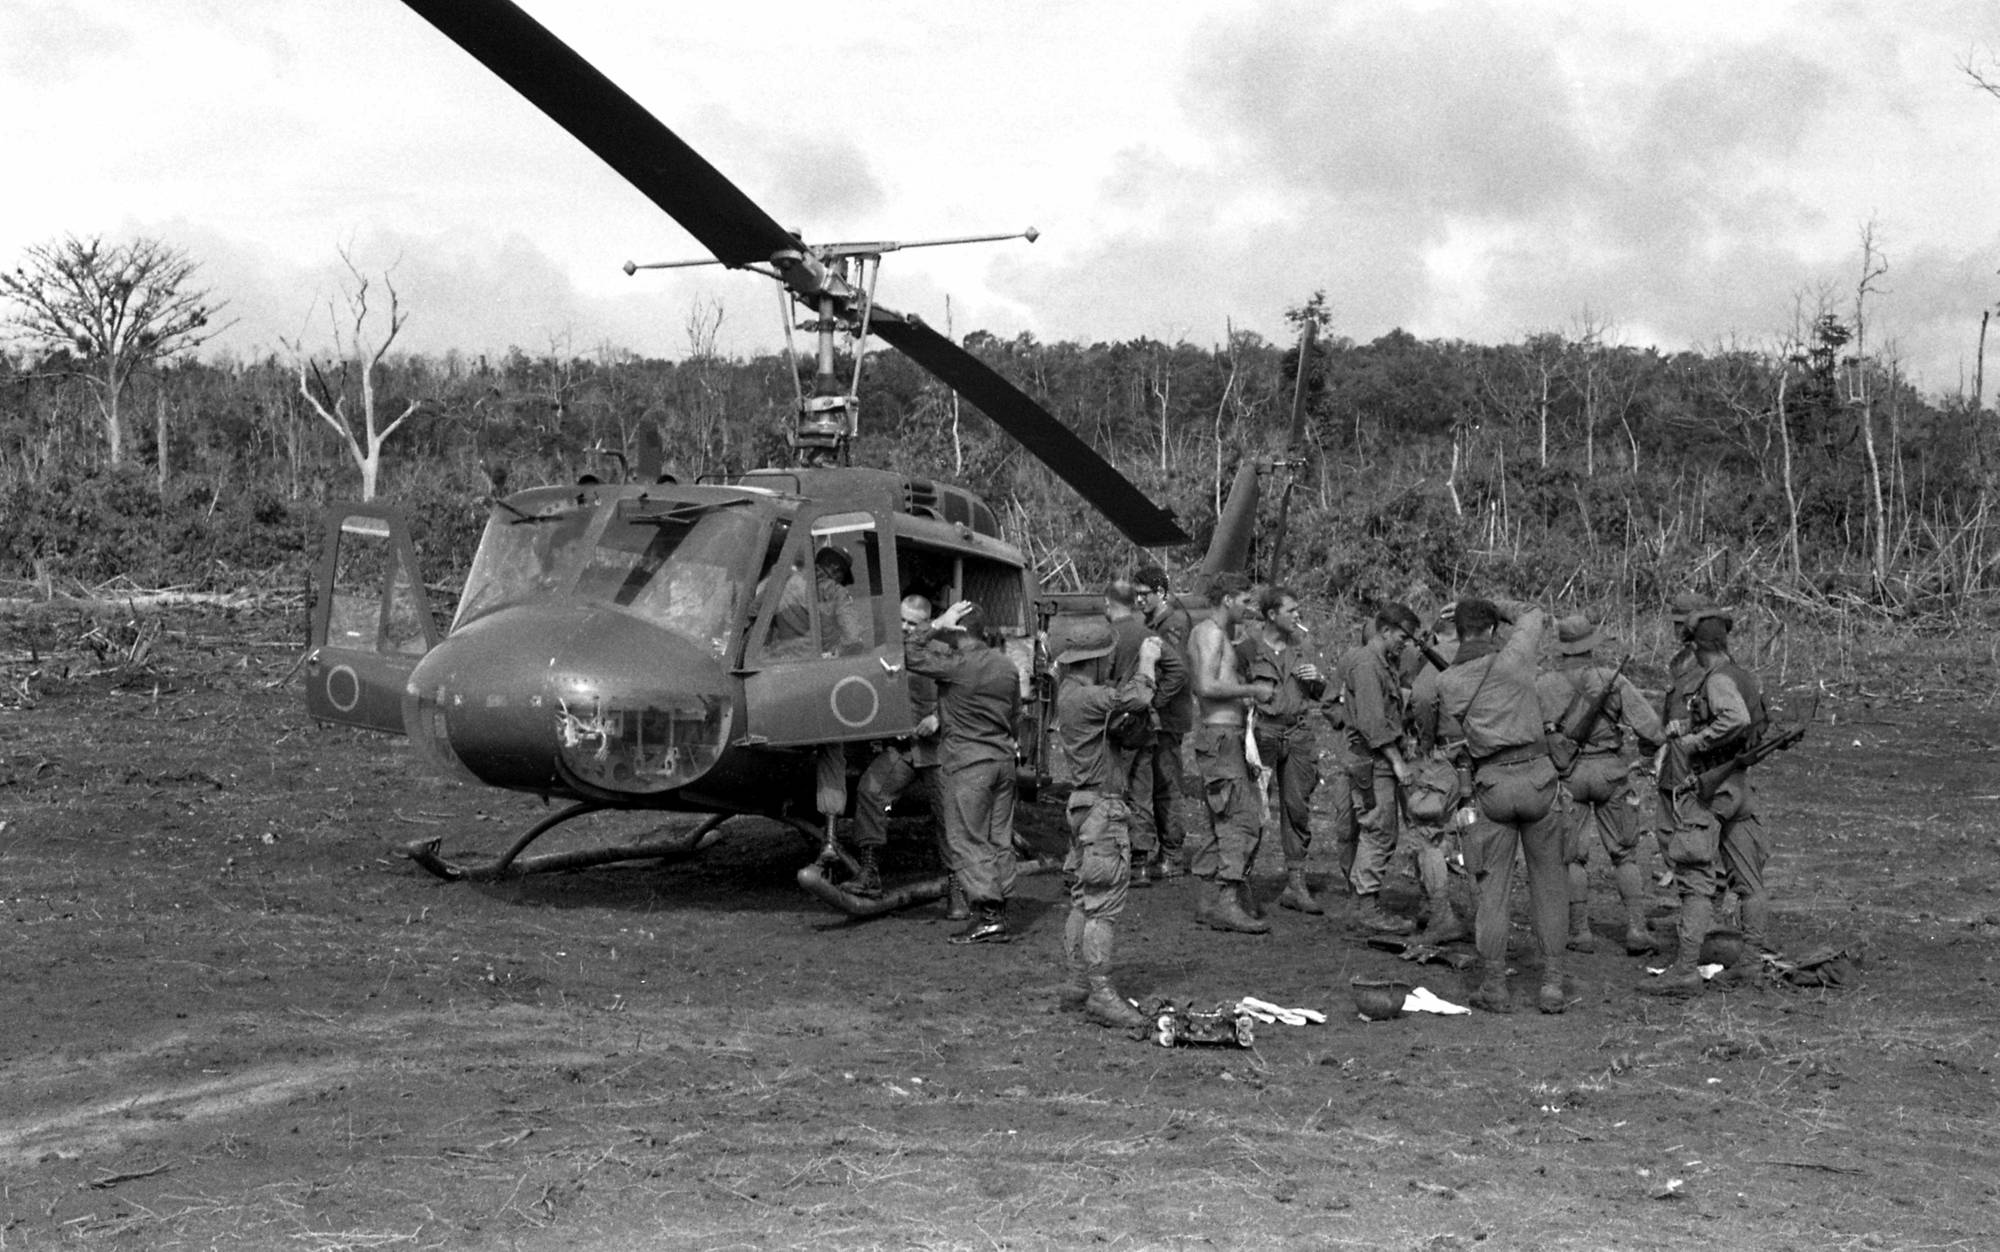 Infantry units and a helicopter.